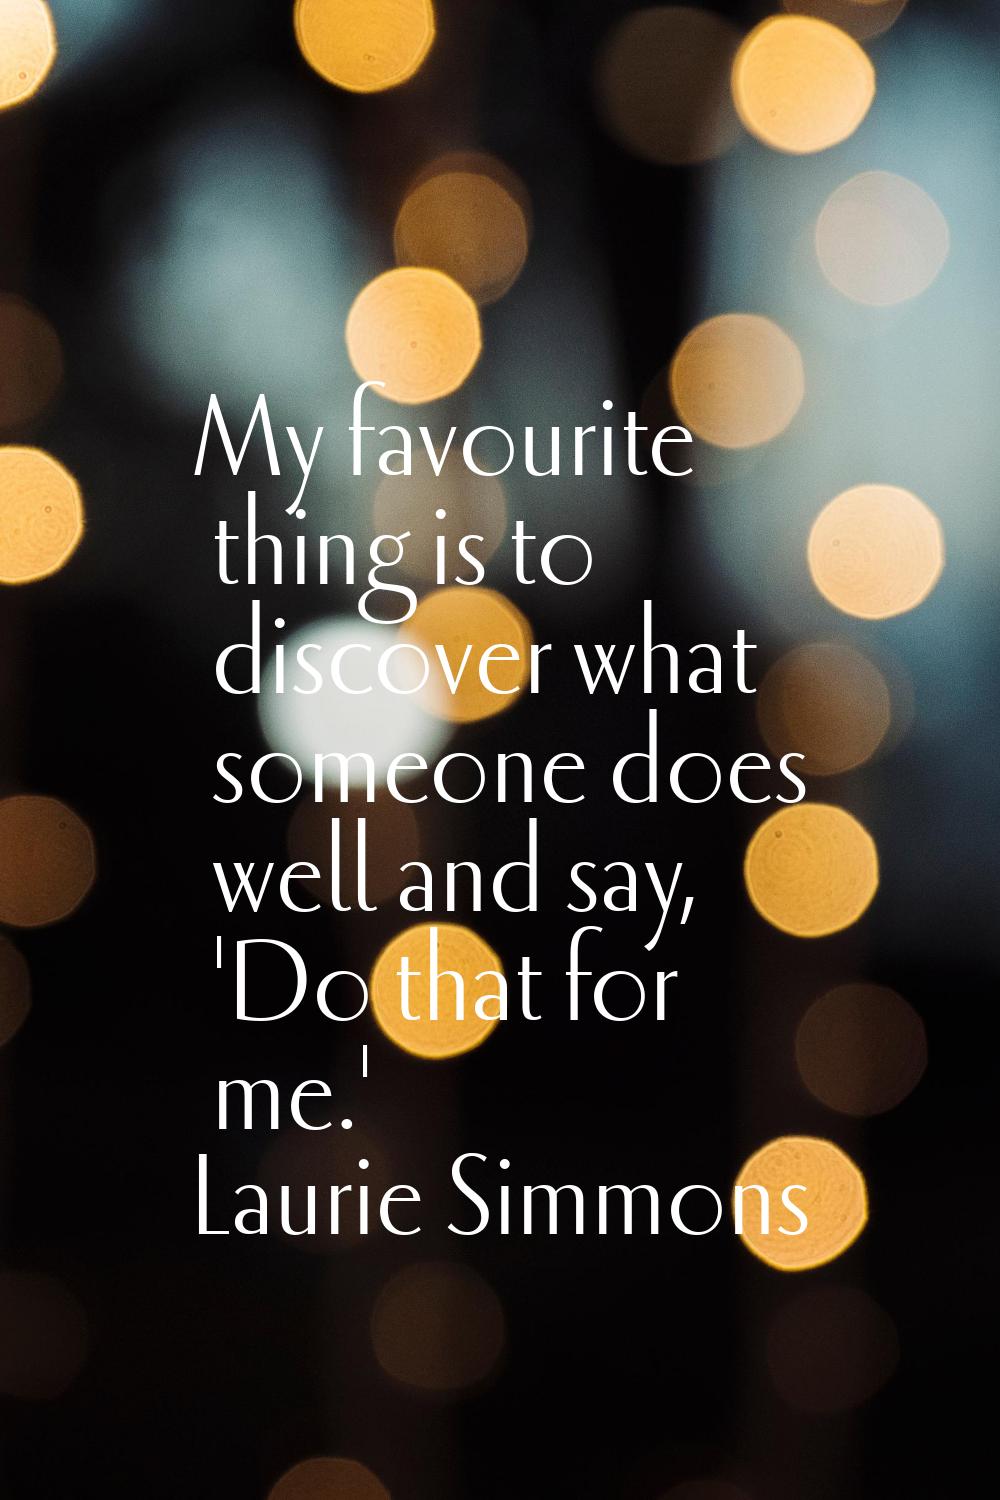 My favourite thing is to discover what someone does well and say, 'Do that for me.'